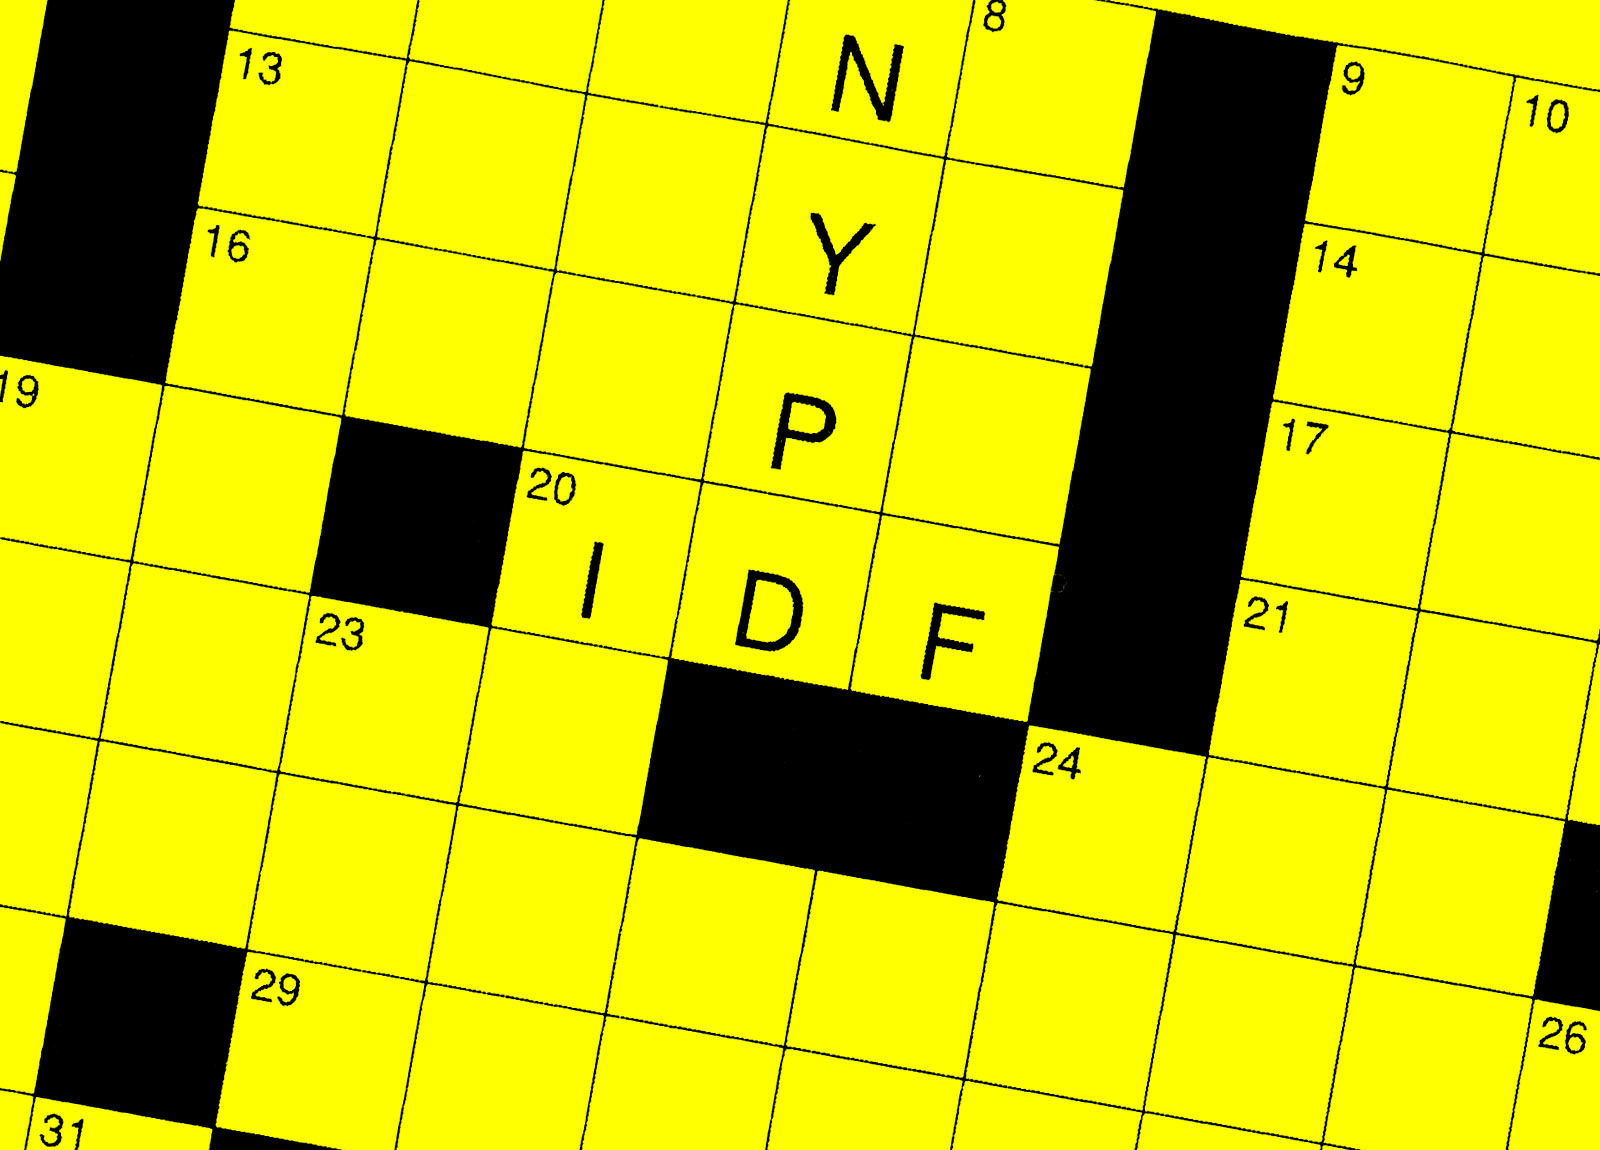 https://newyorkwarcrimes.com/media/pages/crossword-puzzle-may-9-2024/b22ff7bd44-1714943143/nywc-crossword-20240509.jpg